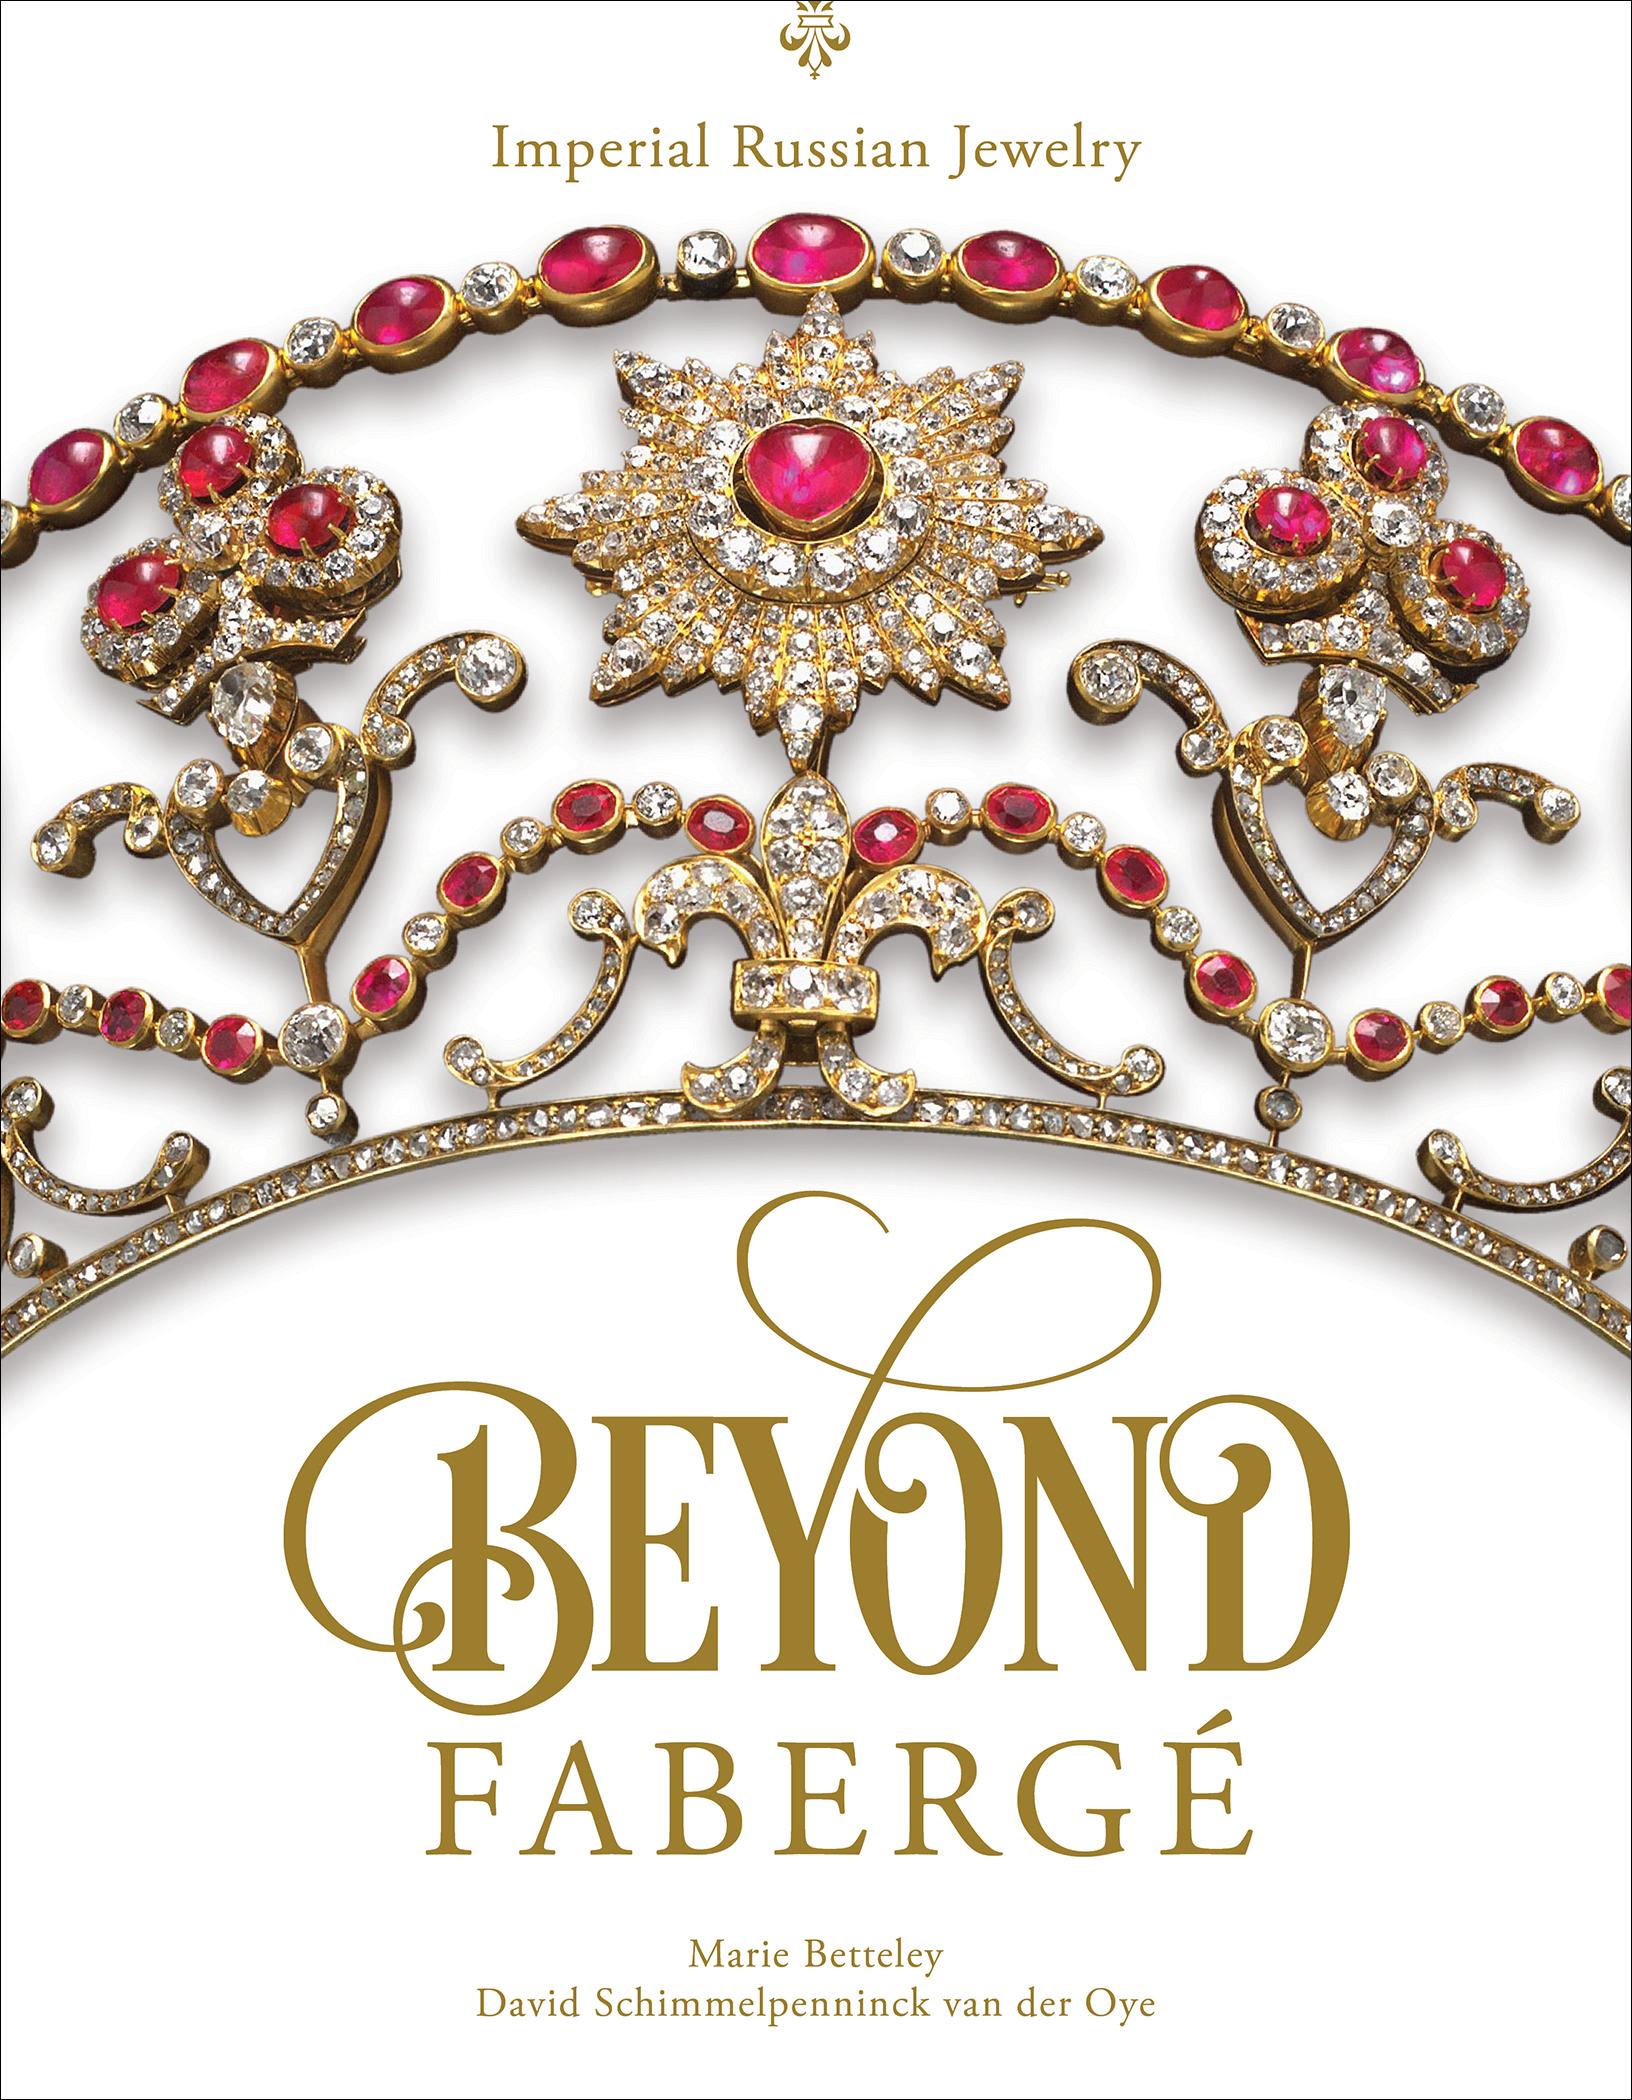 by Marie Betteley and David Schimmelpenninck van der Oye, signed by the authors*

A rare look at the exquisite world of Russian treasures that lies beyond Fabergé. Imperial Russia evokes images of a vanished court’s unparalleled splendor: